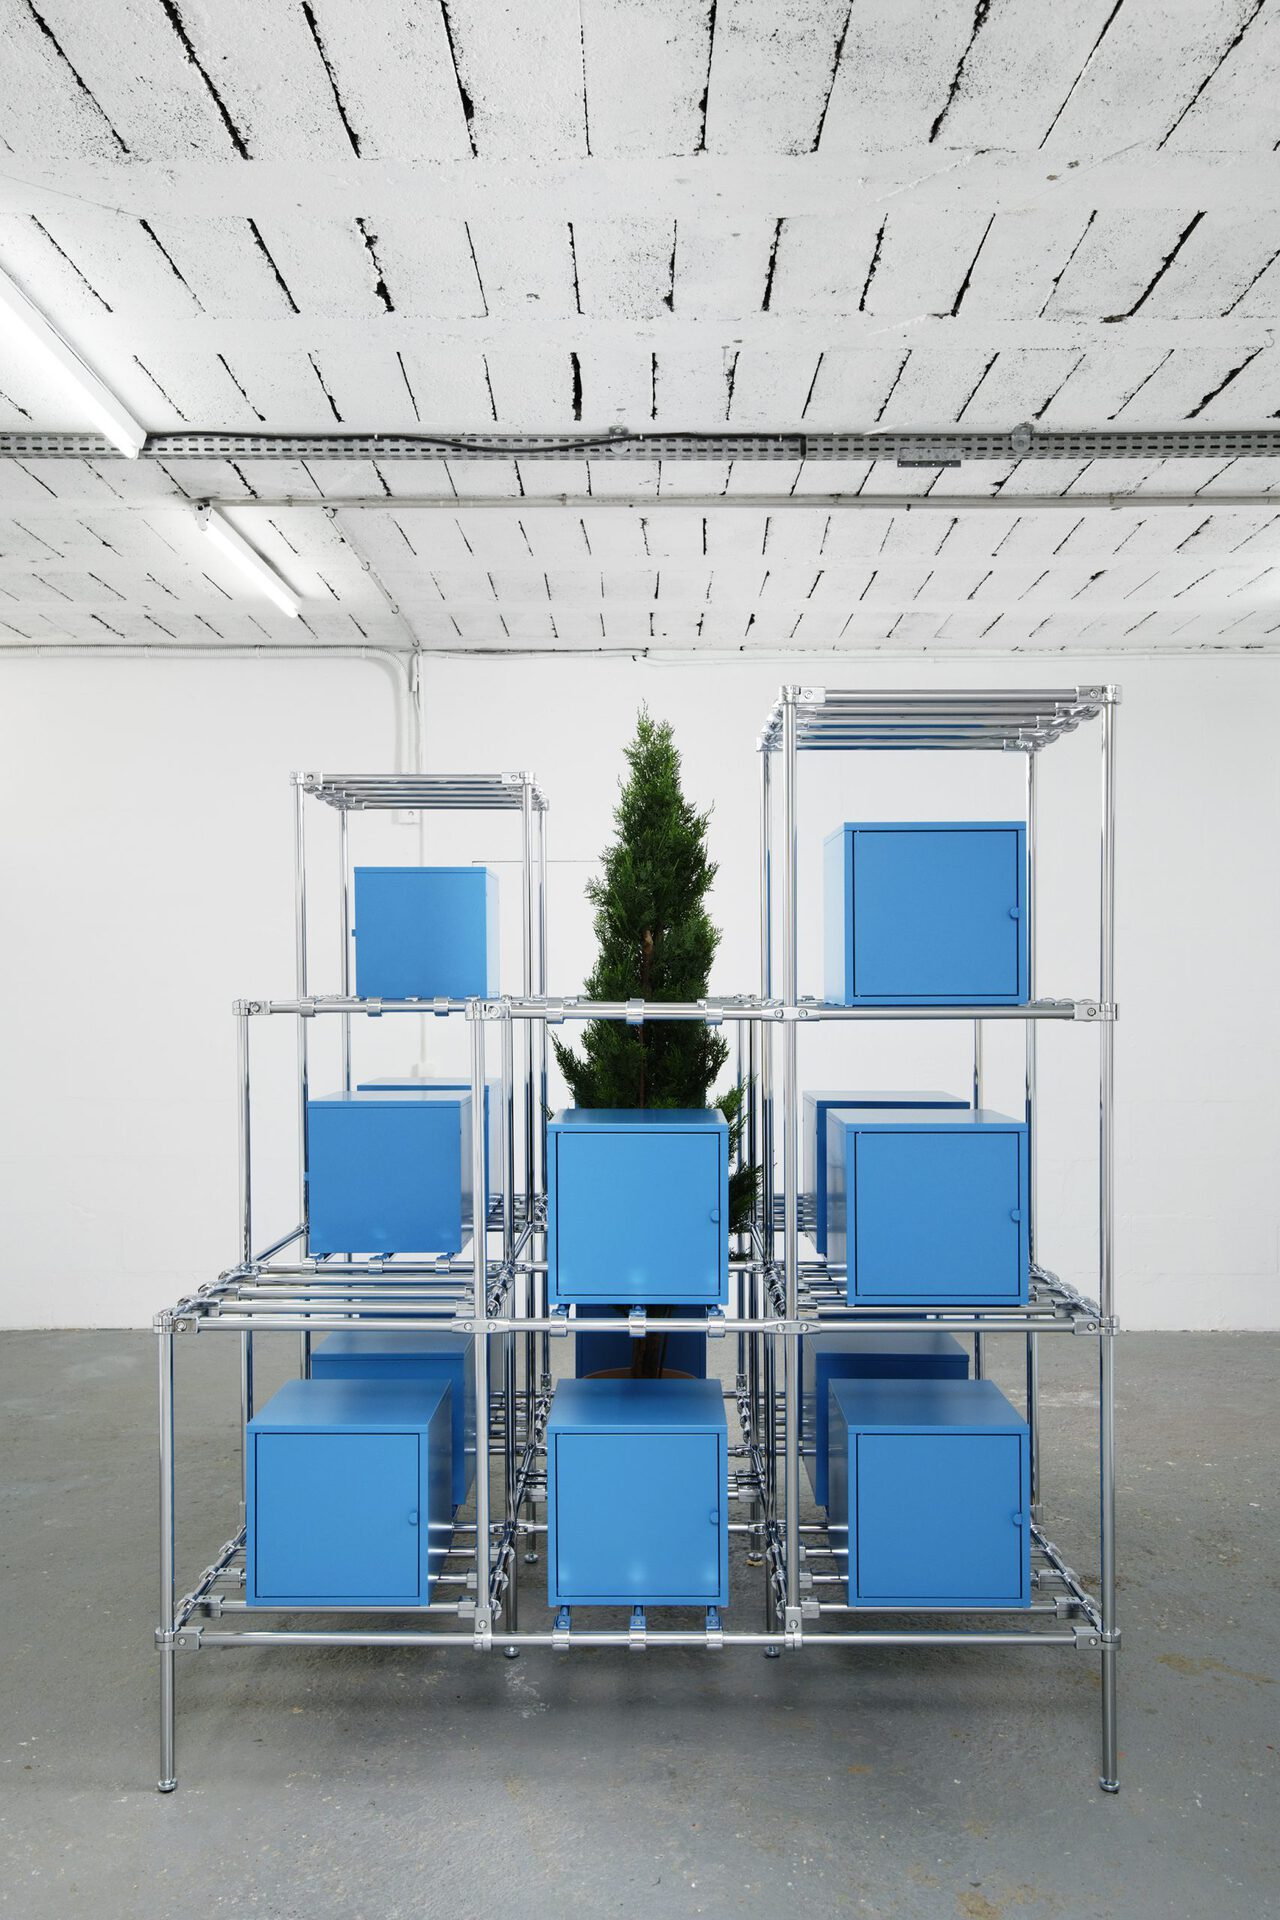 Antoine Duchenet, Dazzling Migelo, 2021, selected objects on chromed display, 185x185x200 cm.